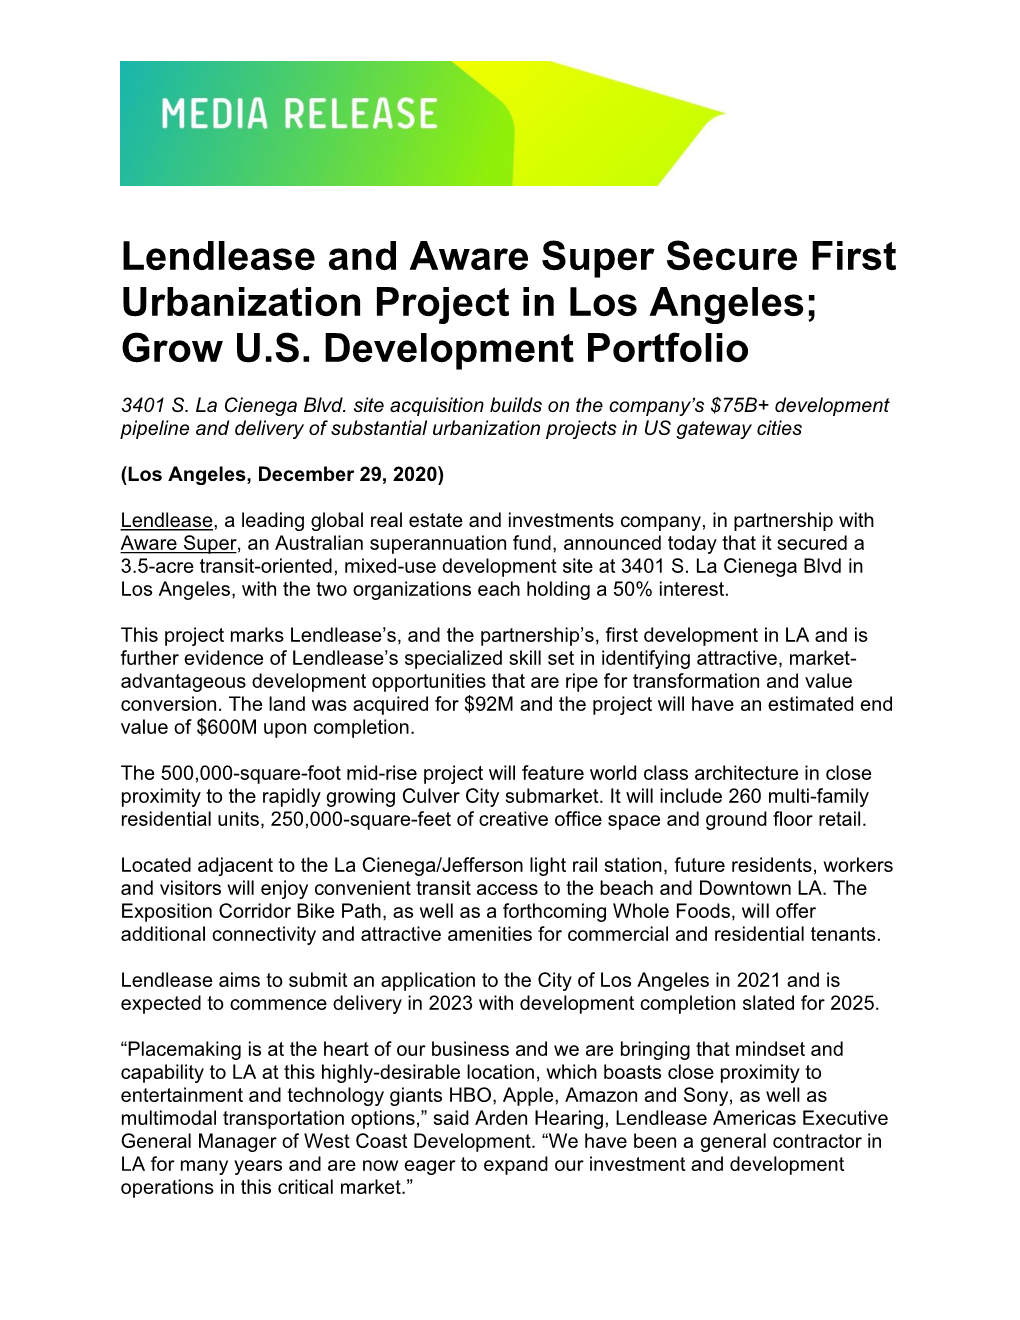 Lendlease and Aware Super Secure First Urbanization Project in Los Angeles; Grow U.S